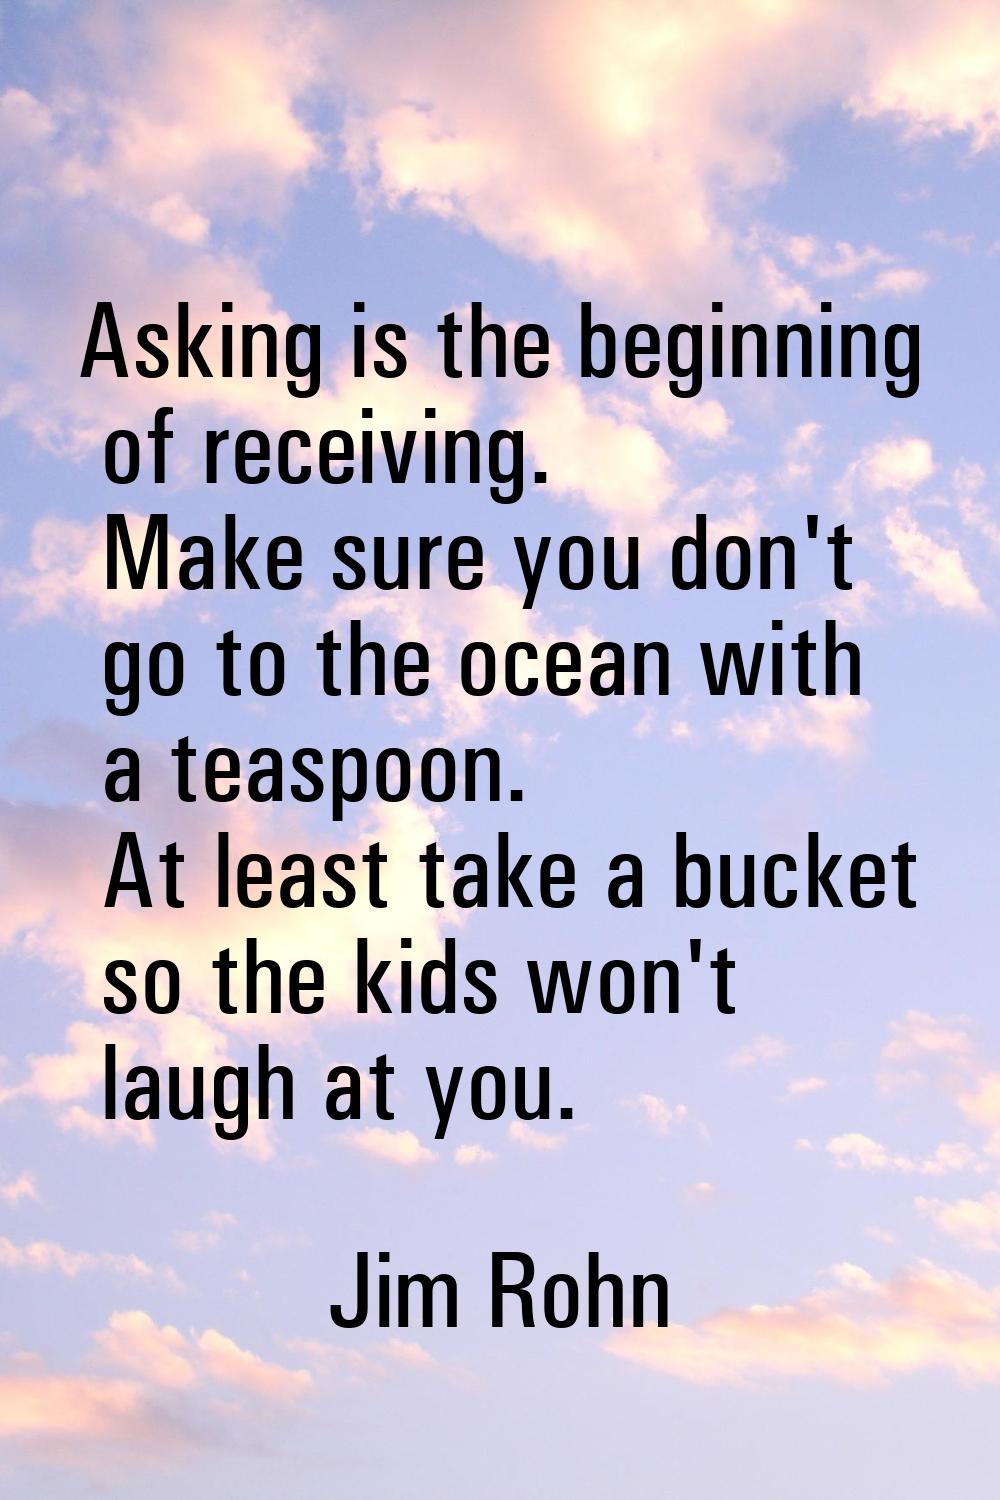 Asking is the beginning of receiving. Make sure you don't go to the ocean with a teaspoon. At least